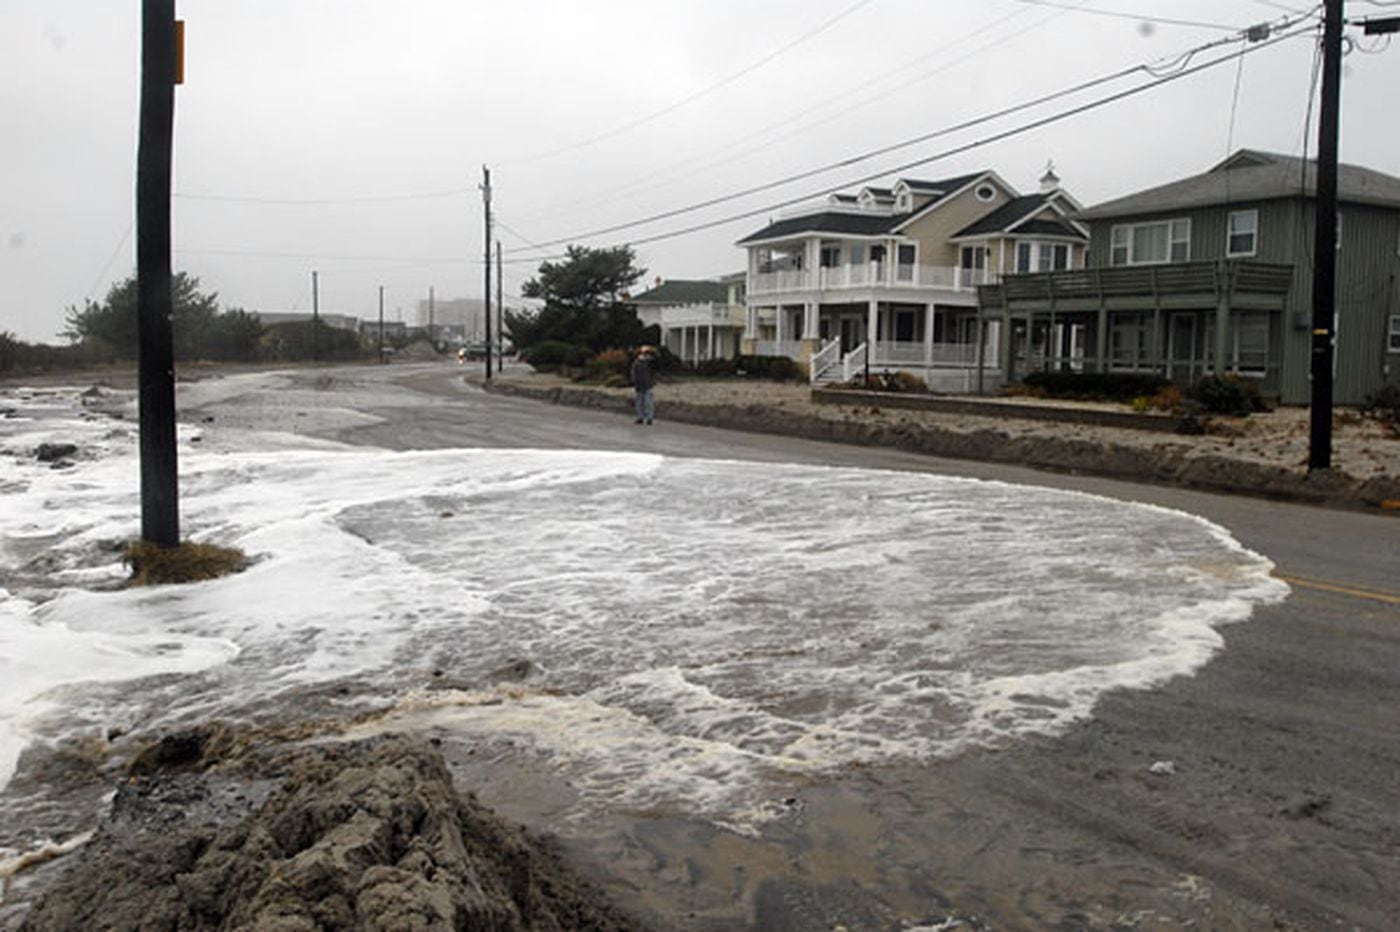 Sea level rise’s impact on property values will be greatest in N.J